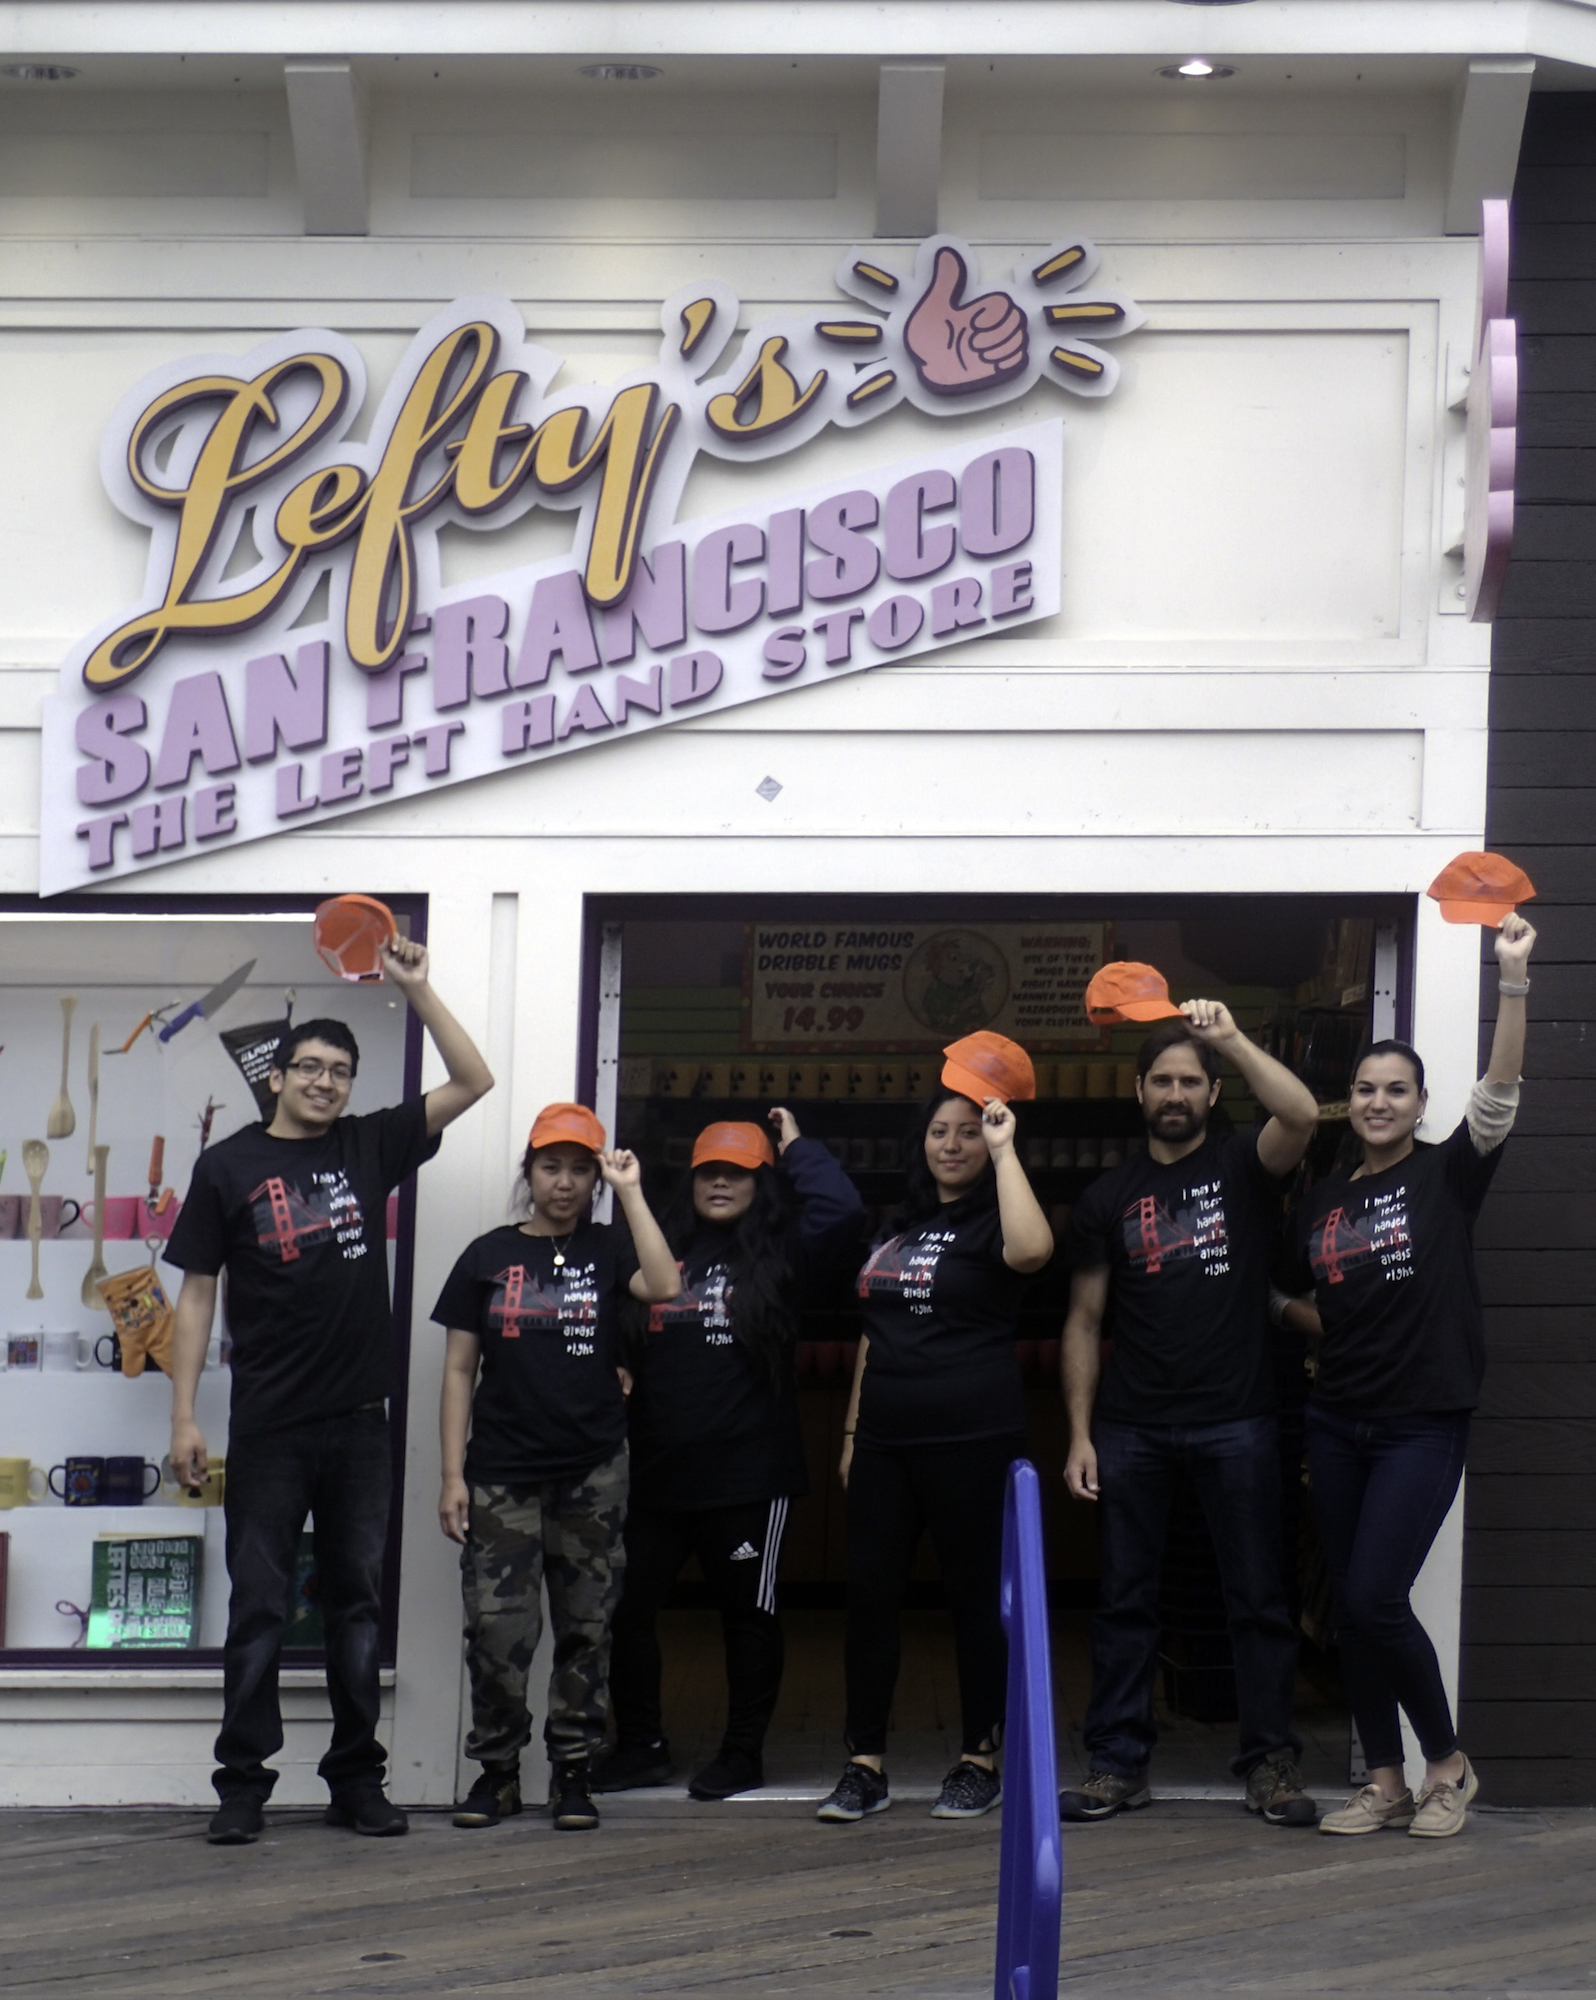 Left-handed employees at Lefty's with Left-Handers' Day Hats